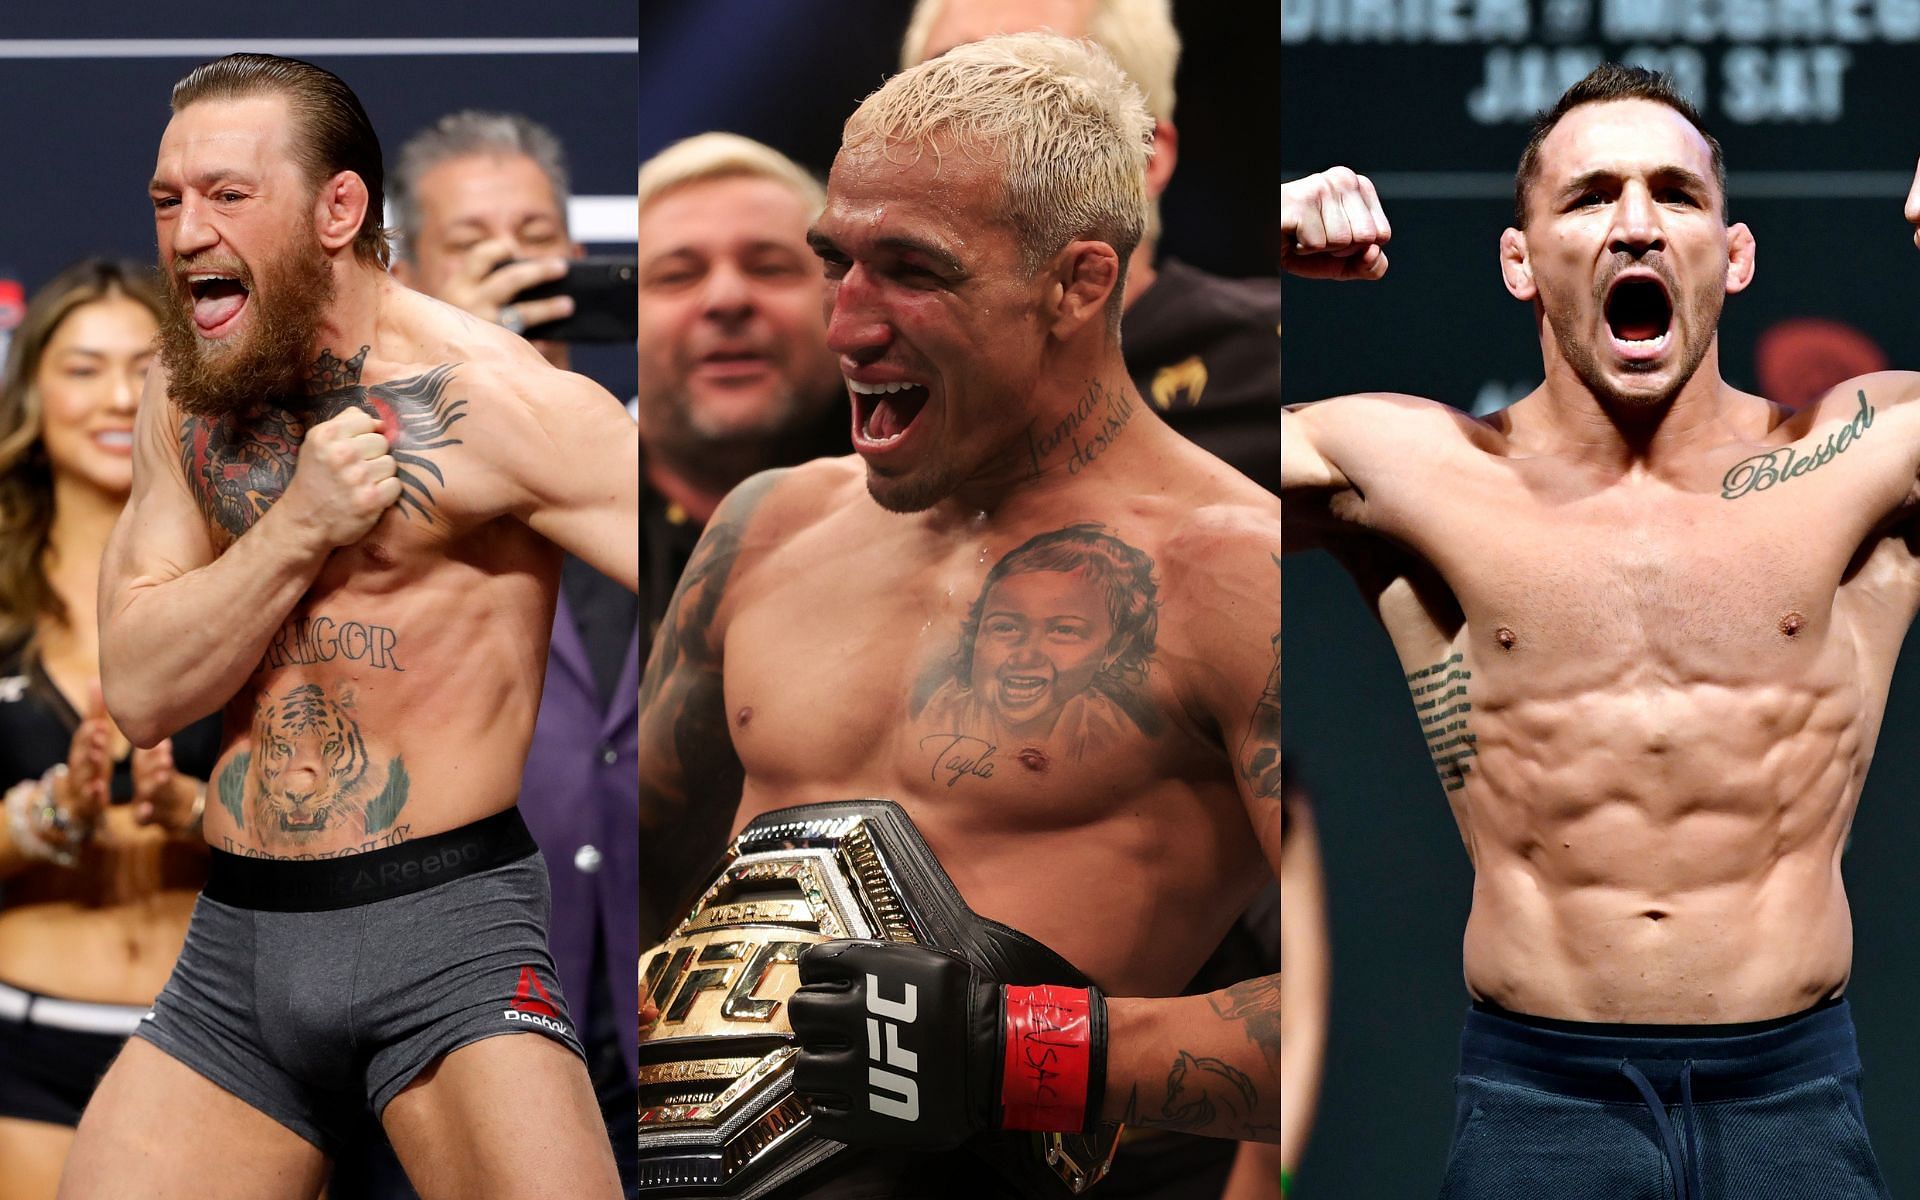 Conor McGregor (left), Charles Oliveira (center) and Michael Chandler (right) (Image credits Getty Images)